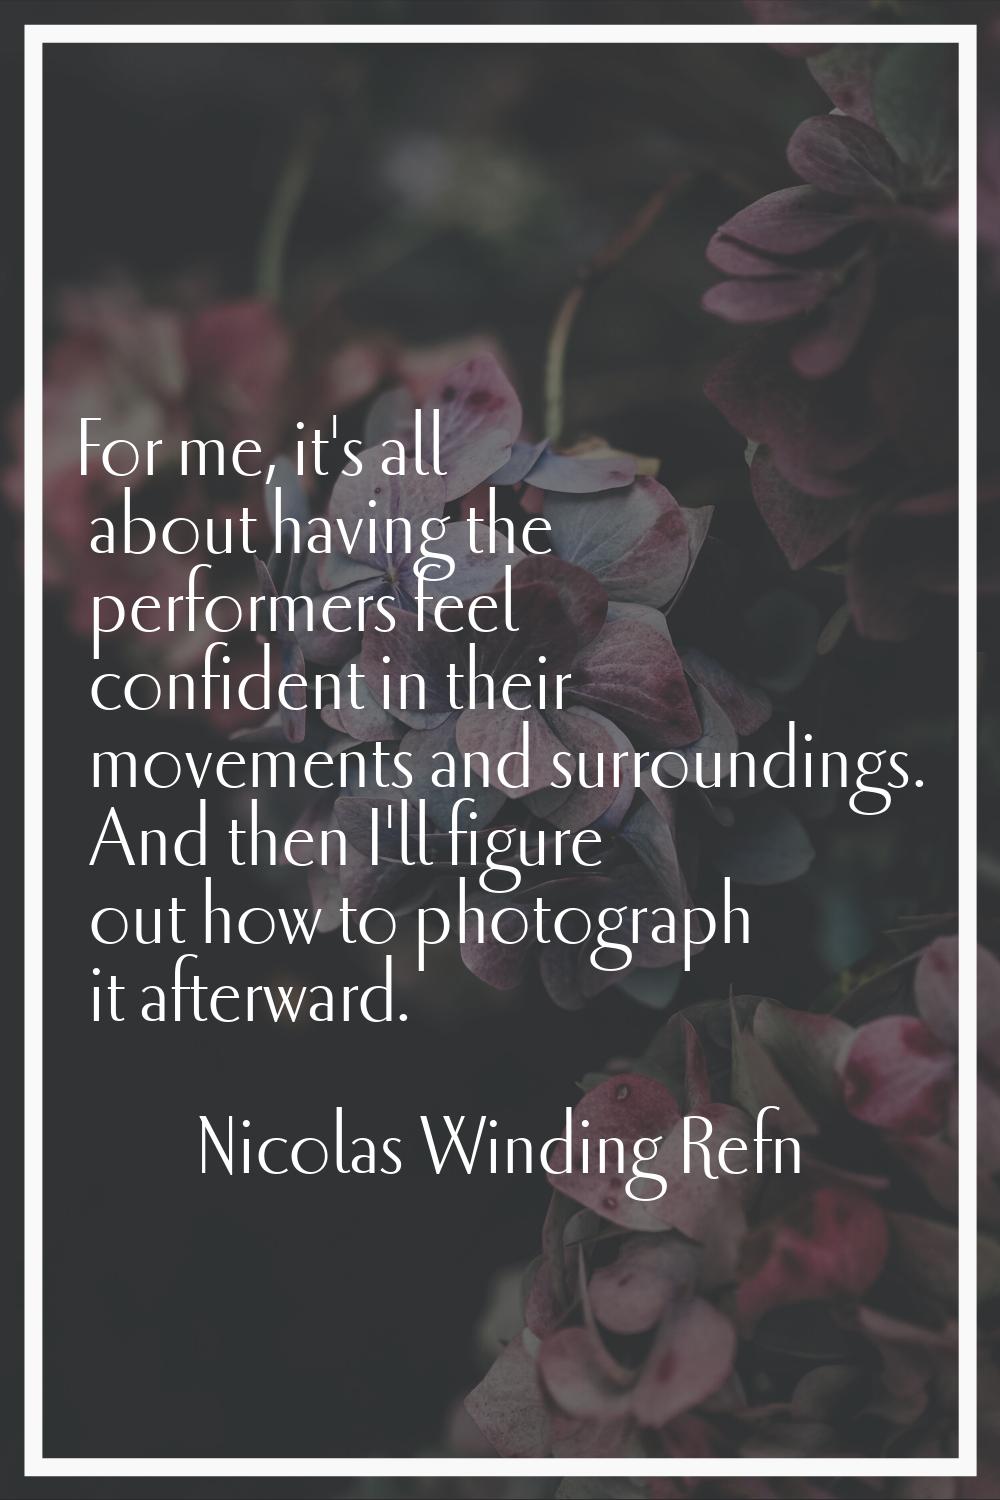 For me, it's all about having the performers feel confident in their movements and surroundings. An